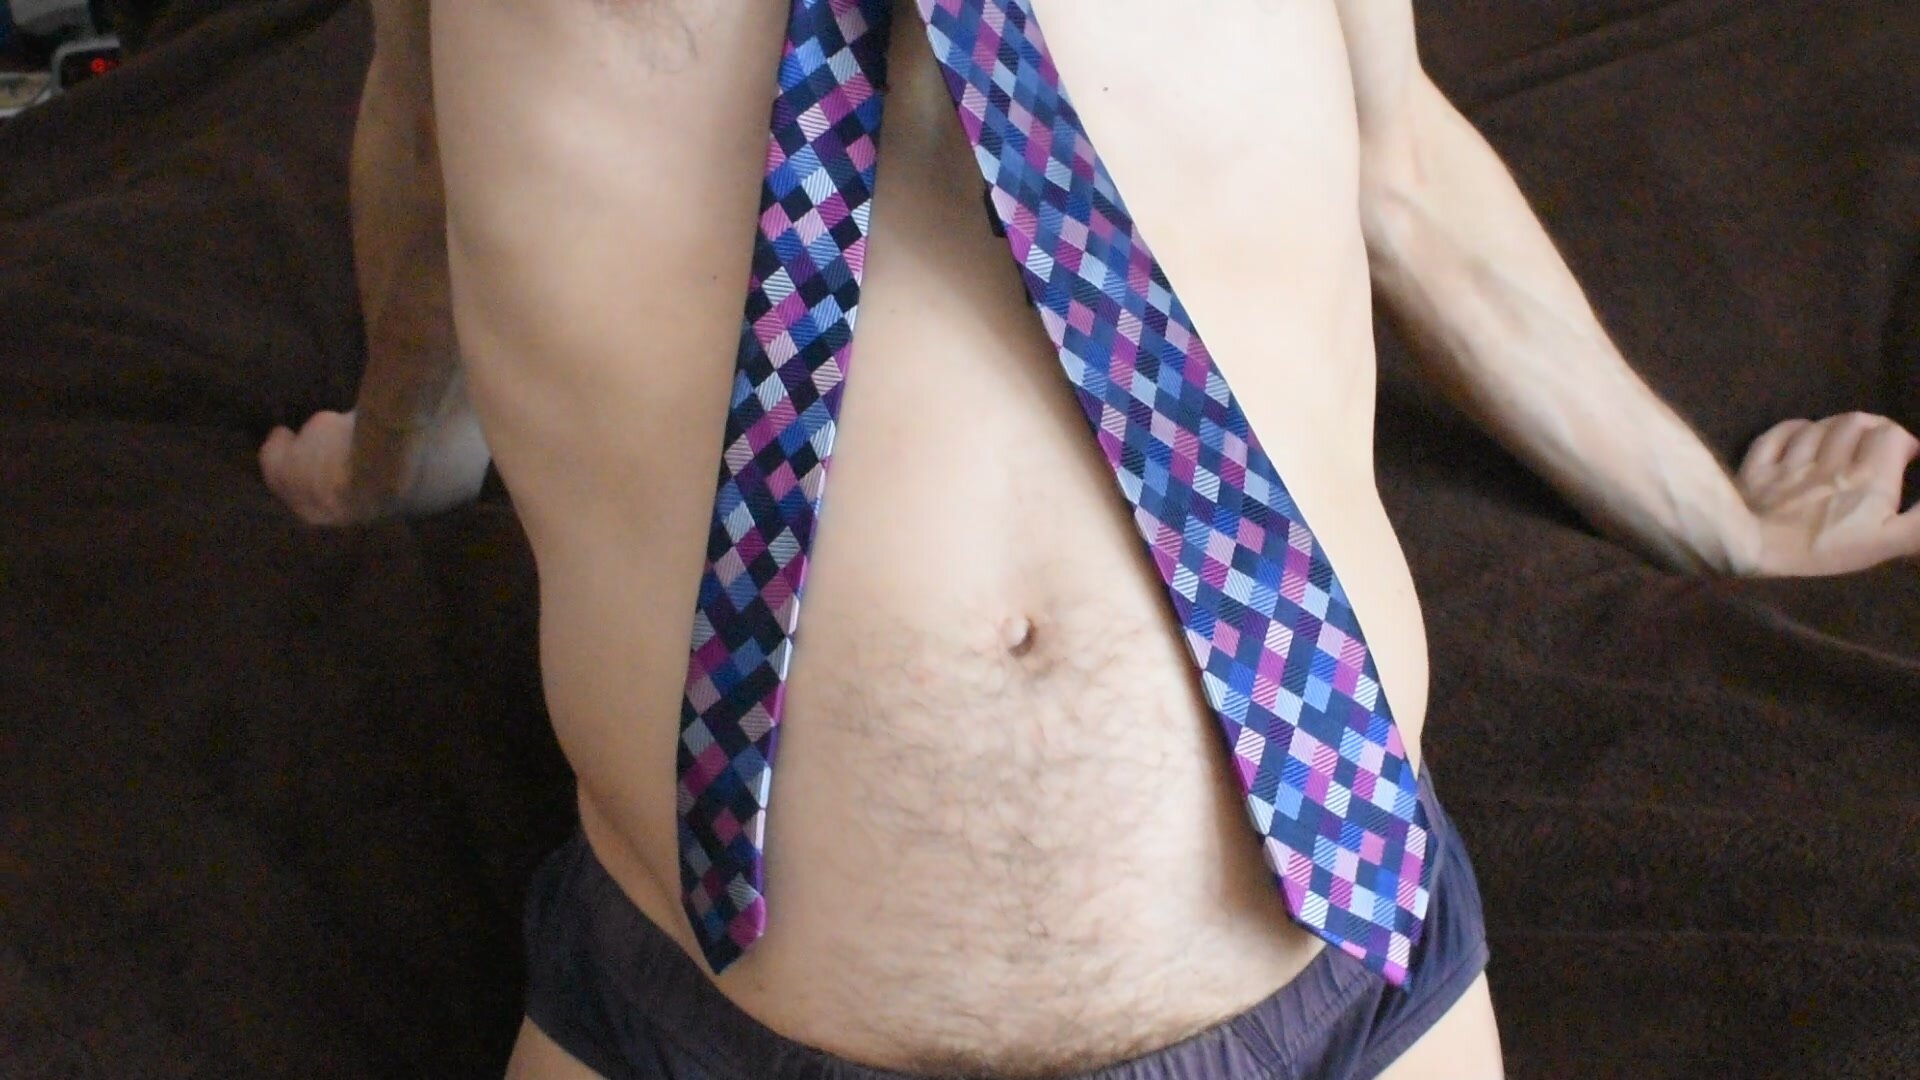 Shirtless guy wears tie and plays with his belly button